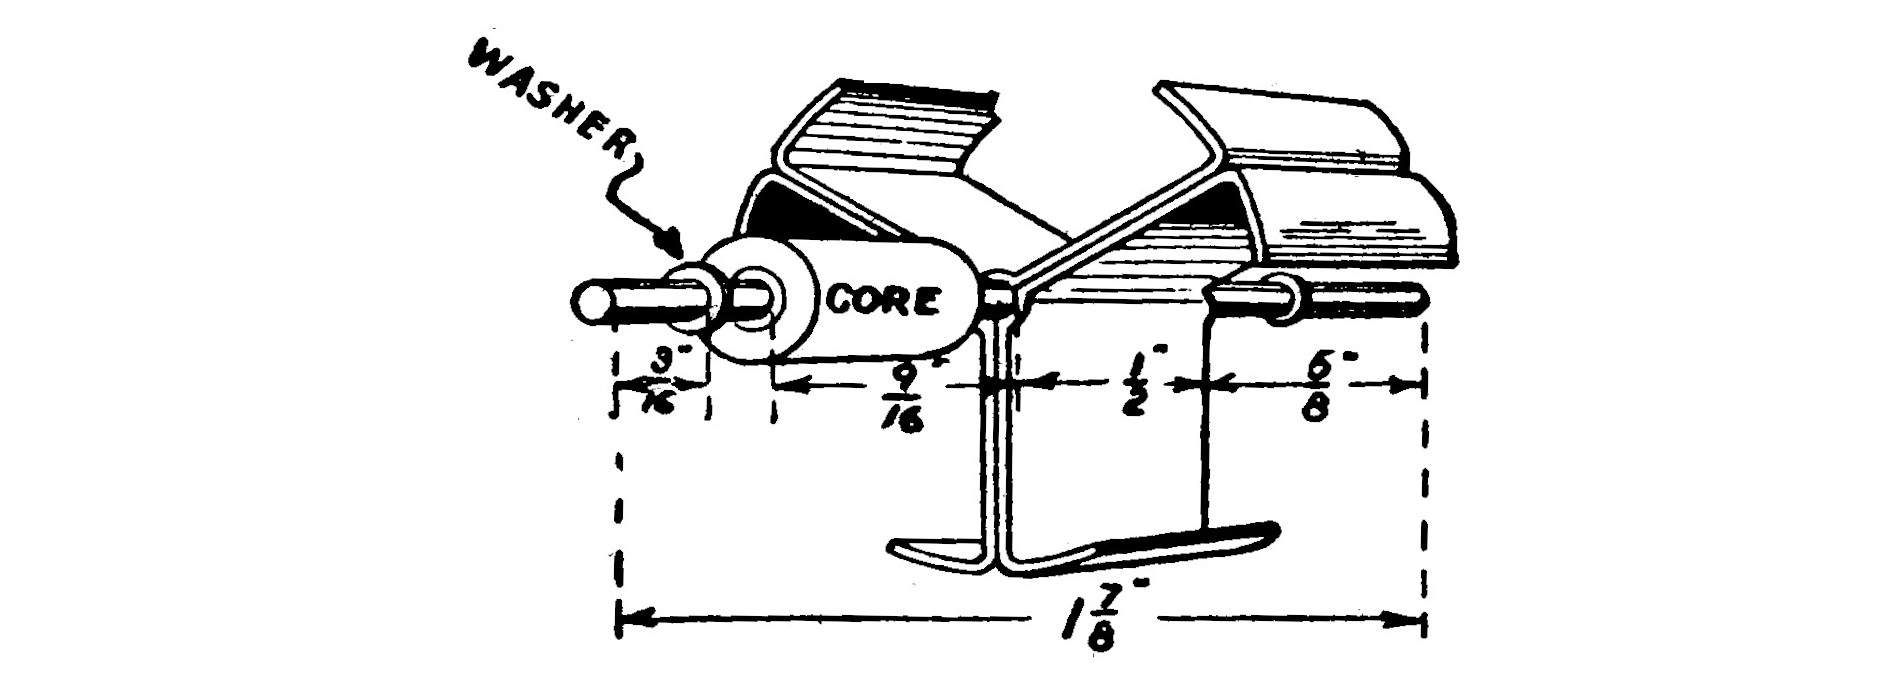 FIG. 22.—Showing the Armature and Shaft with the Commutator Core in position.